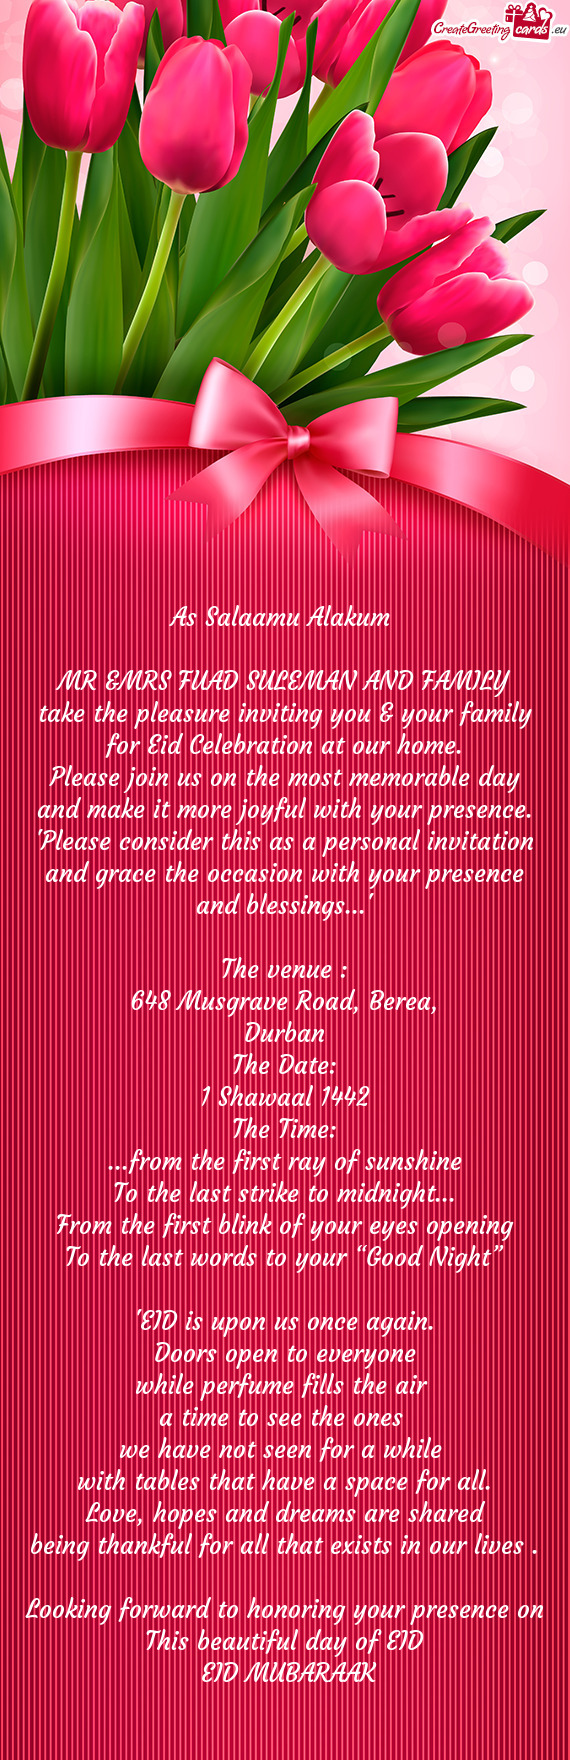 Take the pleasure inviting you & your family for Eid Celebration at our home